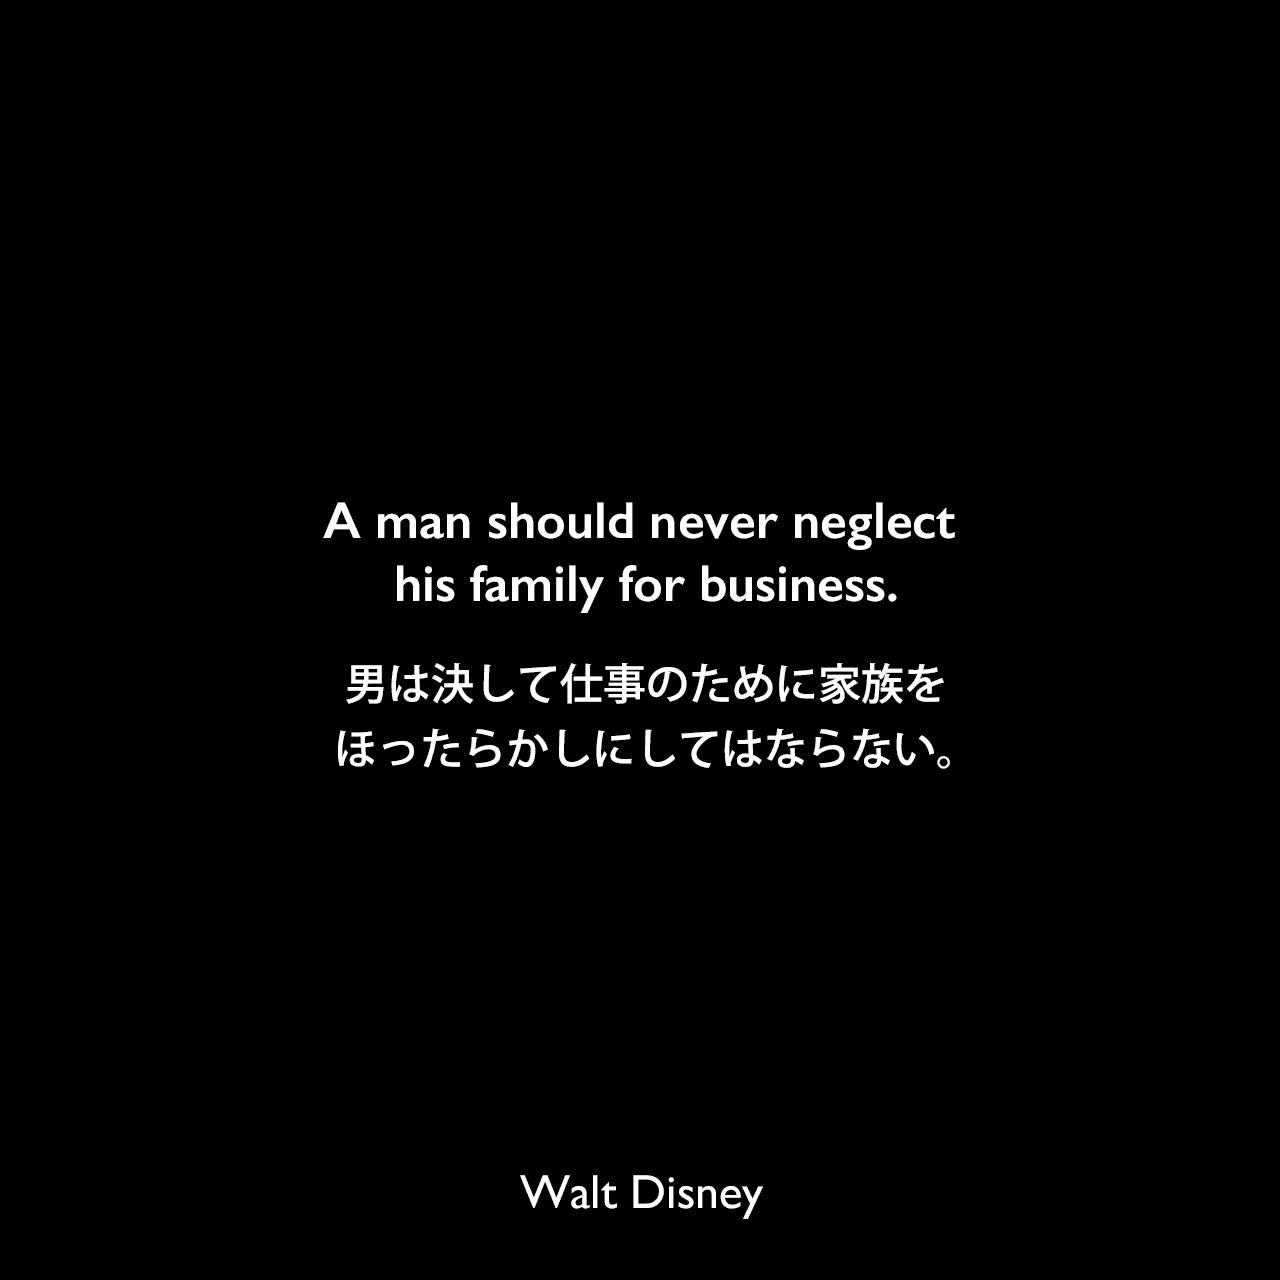 A man should never neglect his family for business.男は決して仕事のために家族をほったらかしにしてはならない。- パットウィリアムズによる本「How to Be Like Walt: Capturing the Disney Magic Every Day of Your Life」より